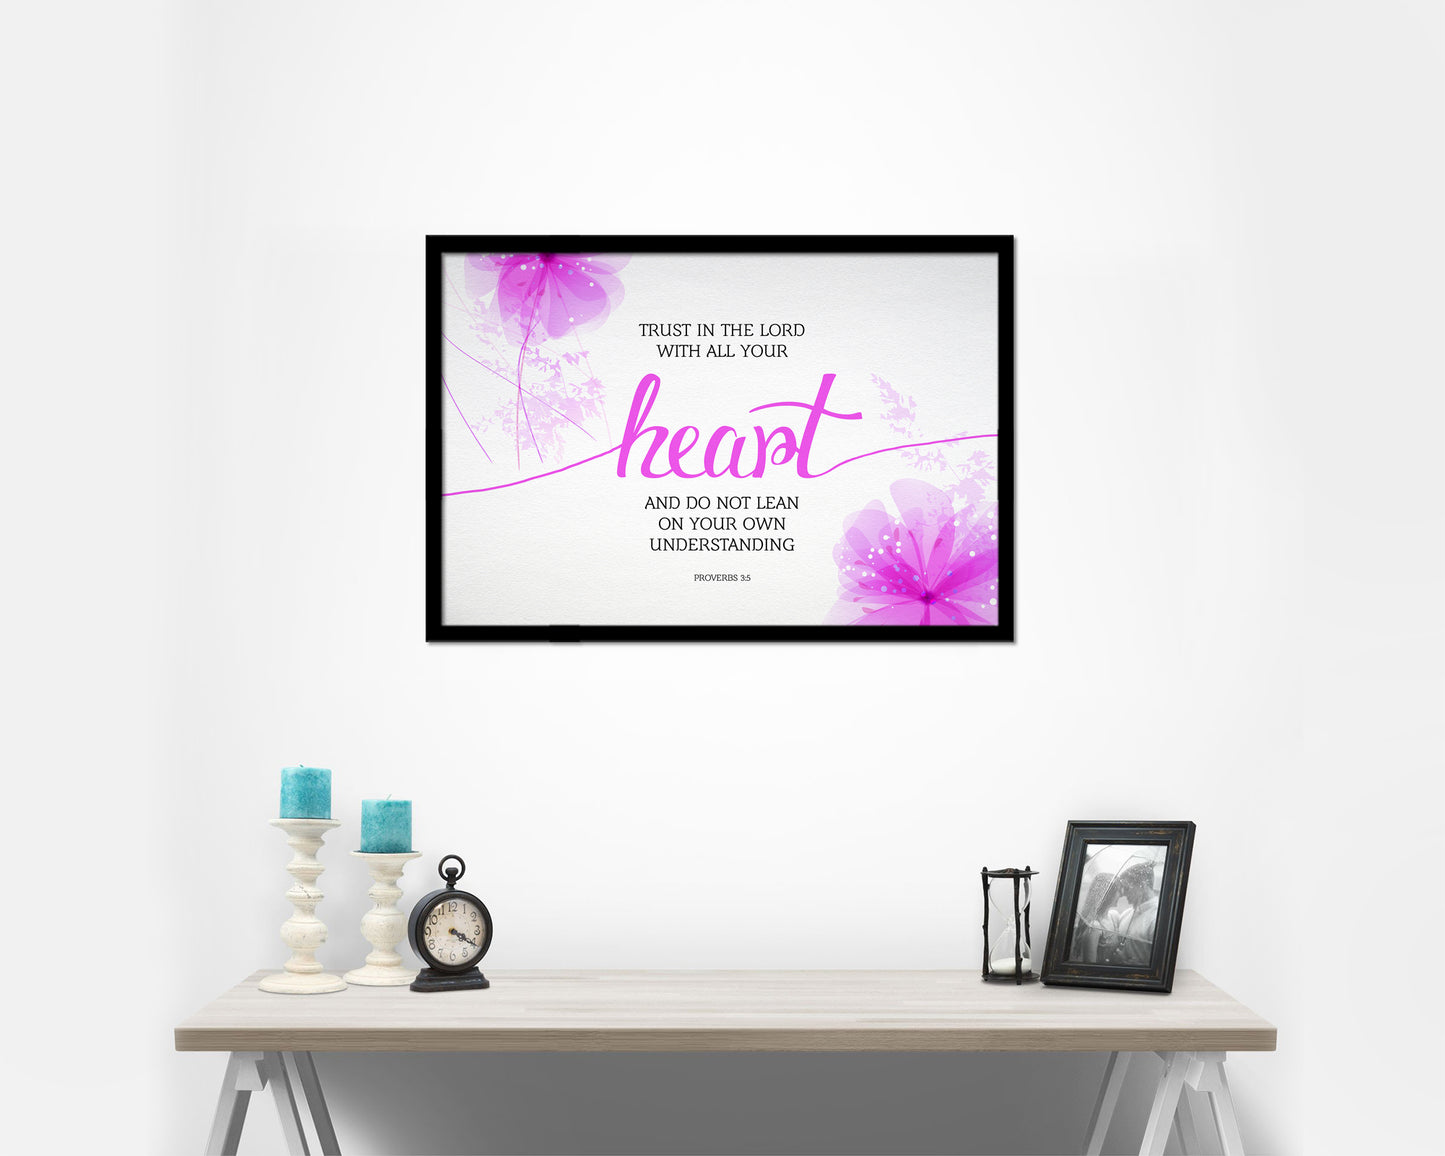 Trust in the Lord with all your Heart, Proverbs 3:5 Bible Verse Scripture Framed Art